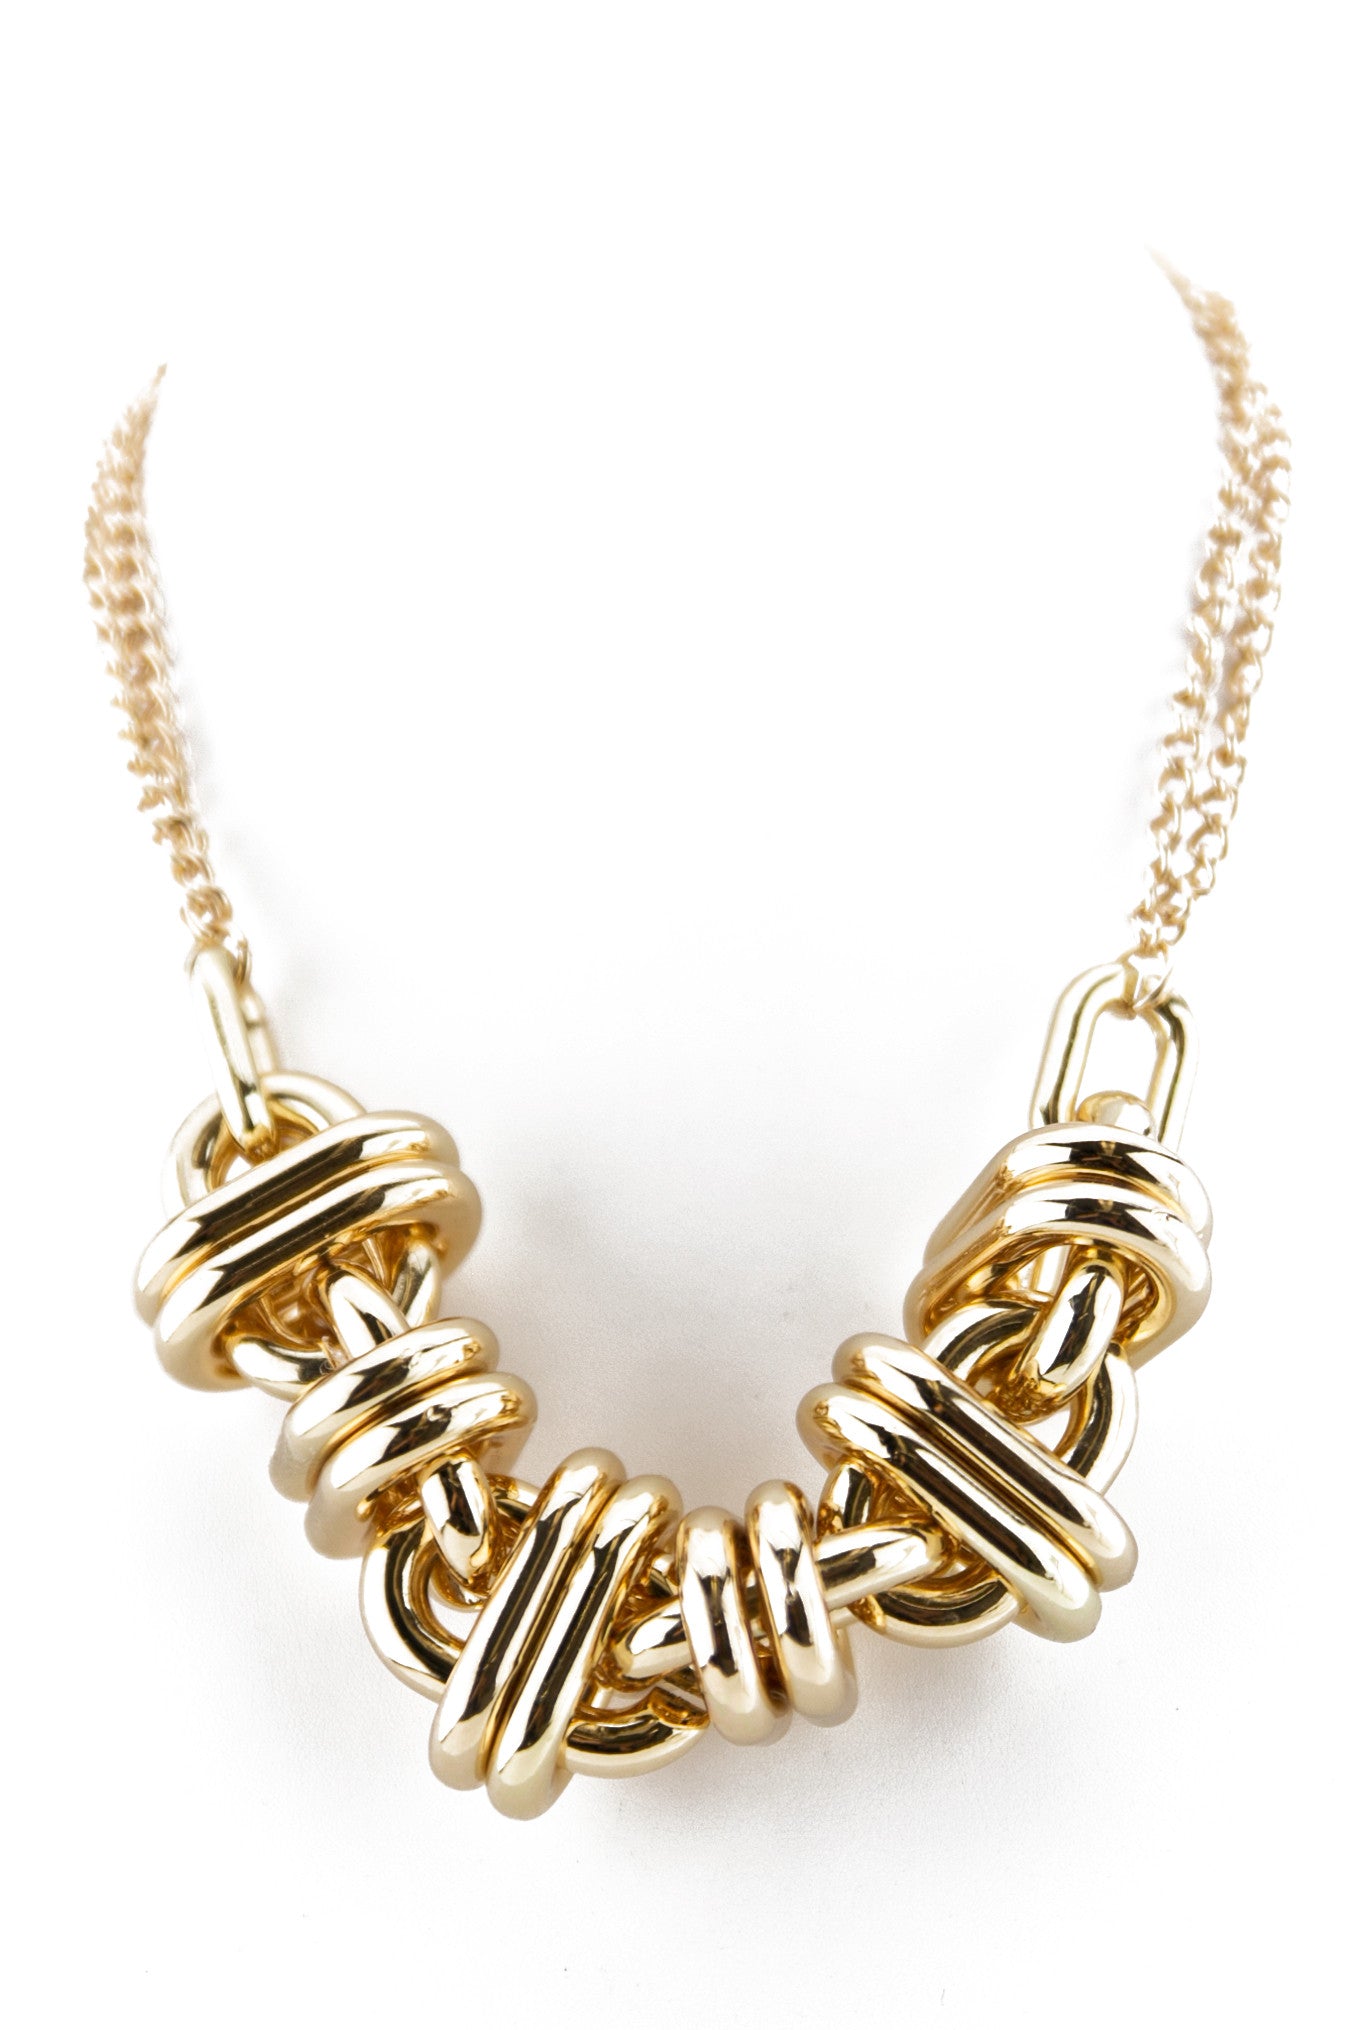 PLATED LINK CHAINED NECKLACE - Haute & Rebellious